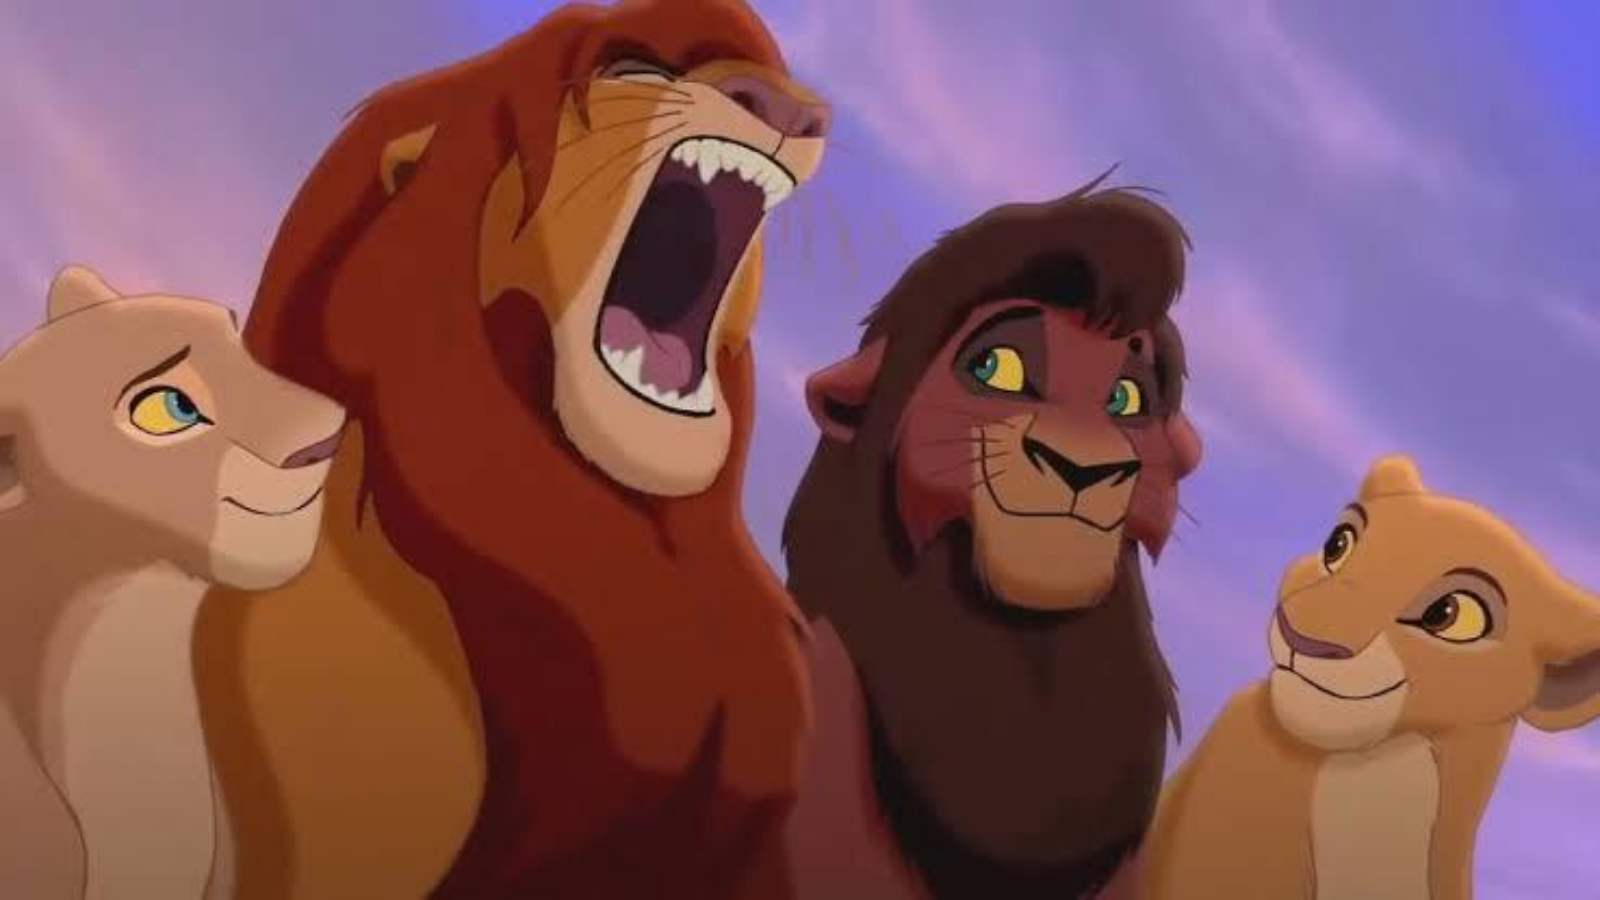 Disney's Lion King was the highest grossing movie of 2019